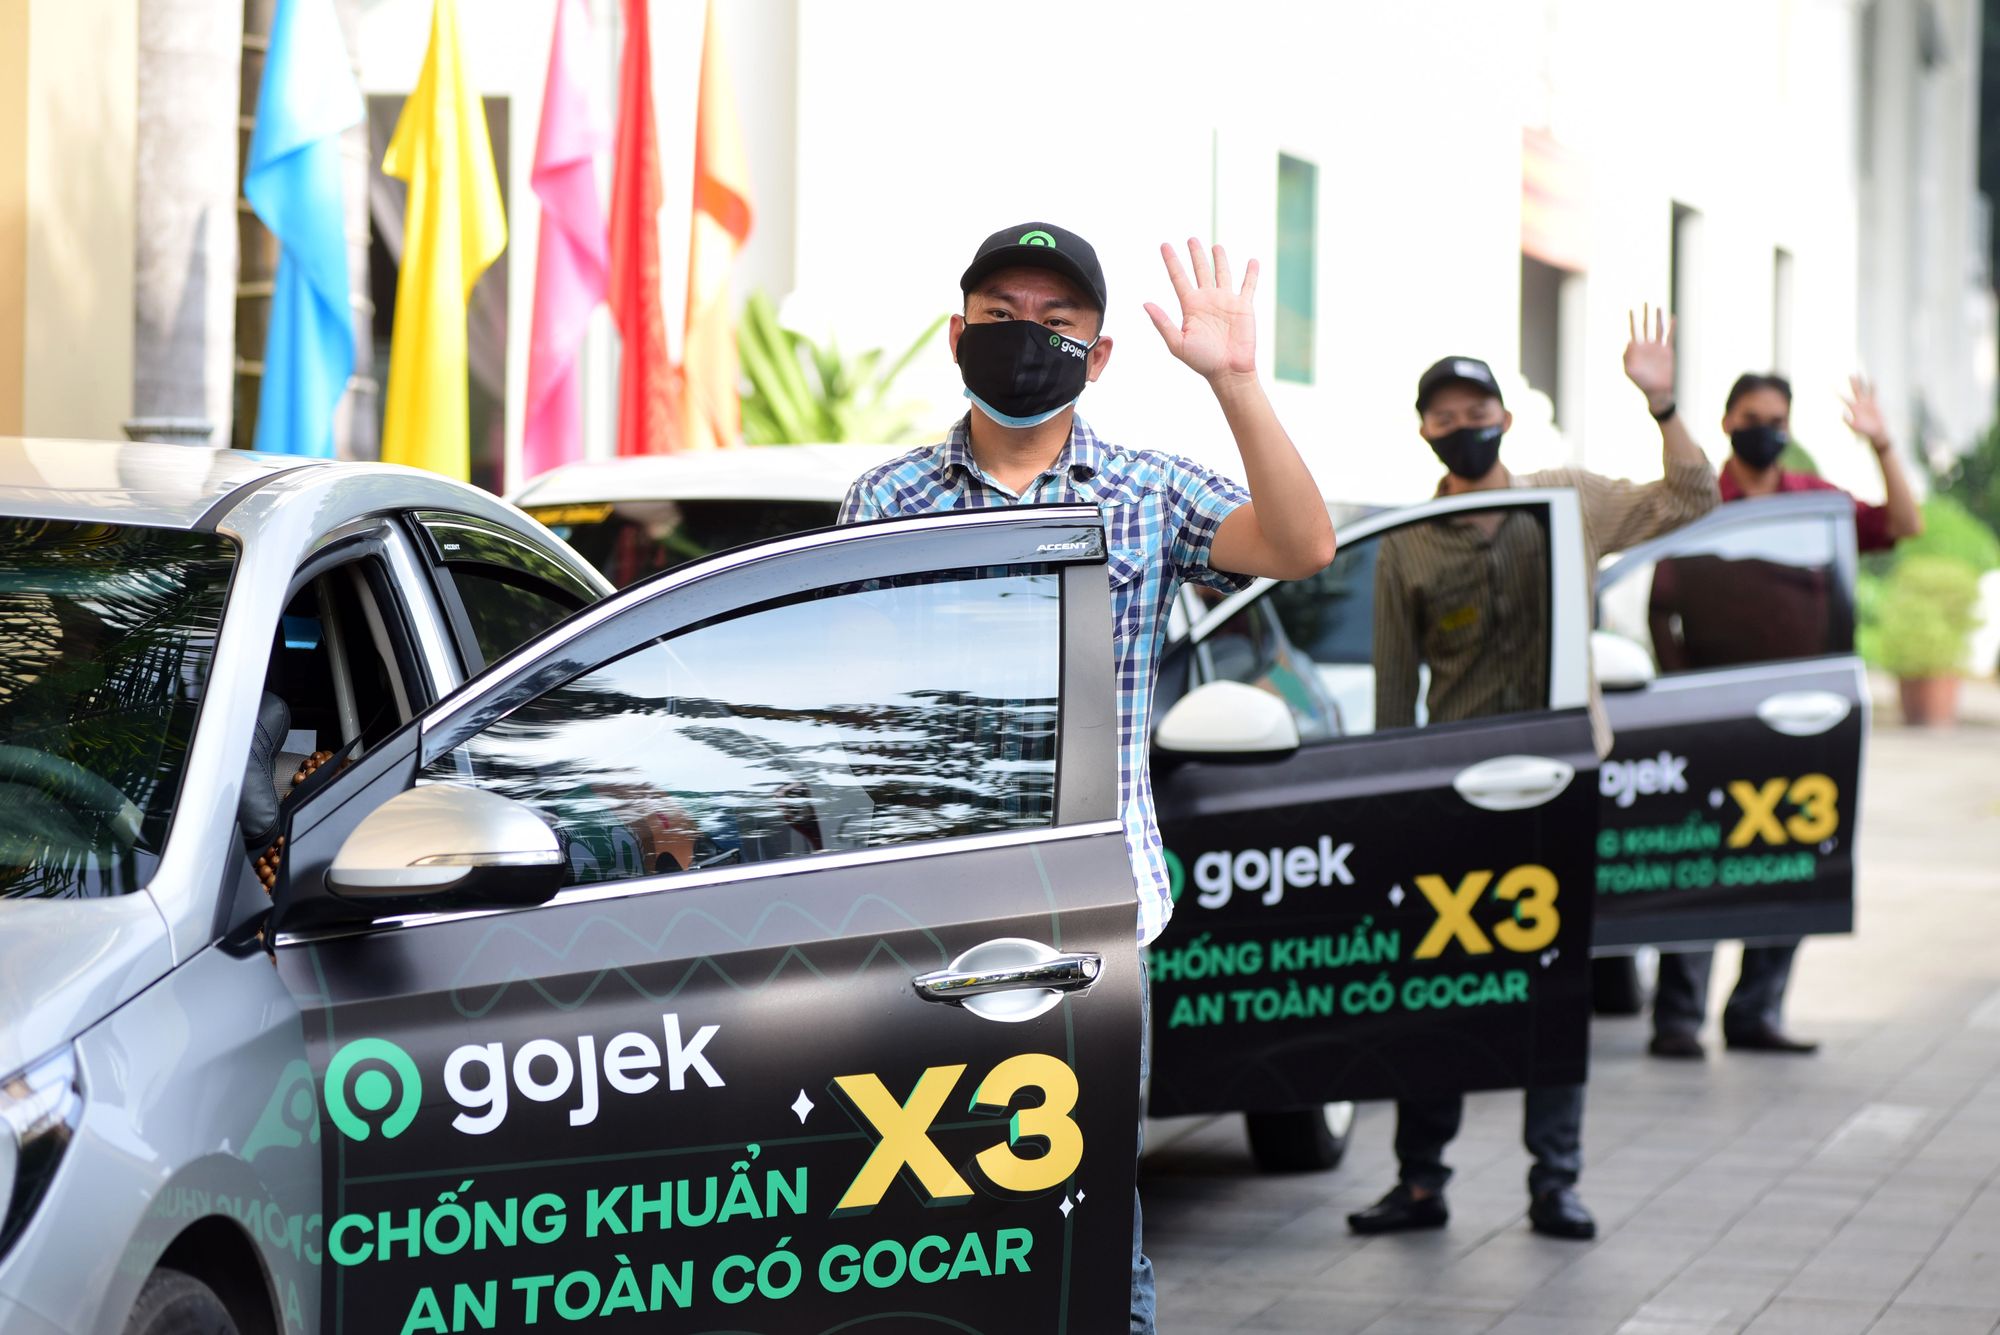 Gojek officially launches GoCar for all users in Ho Chi Minh City, starting with its GoCar Protect service